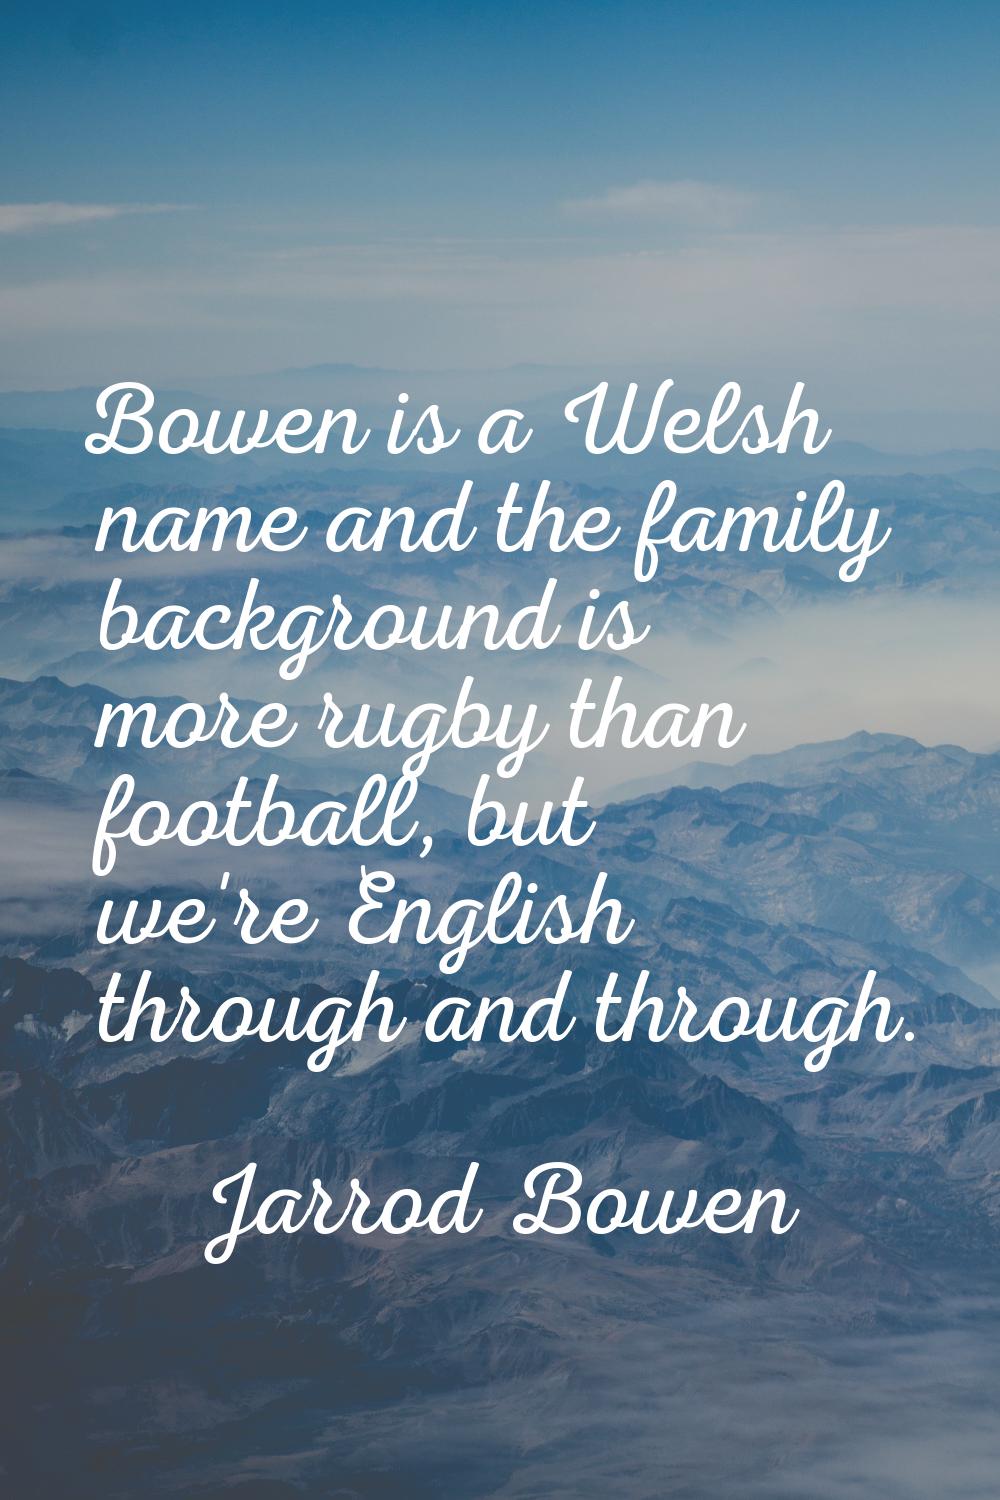 Bowen is a Welsh name and the family background is more rugby than football, but we're English thro